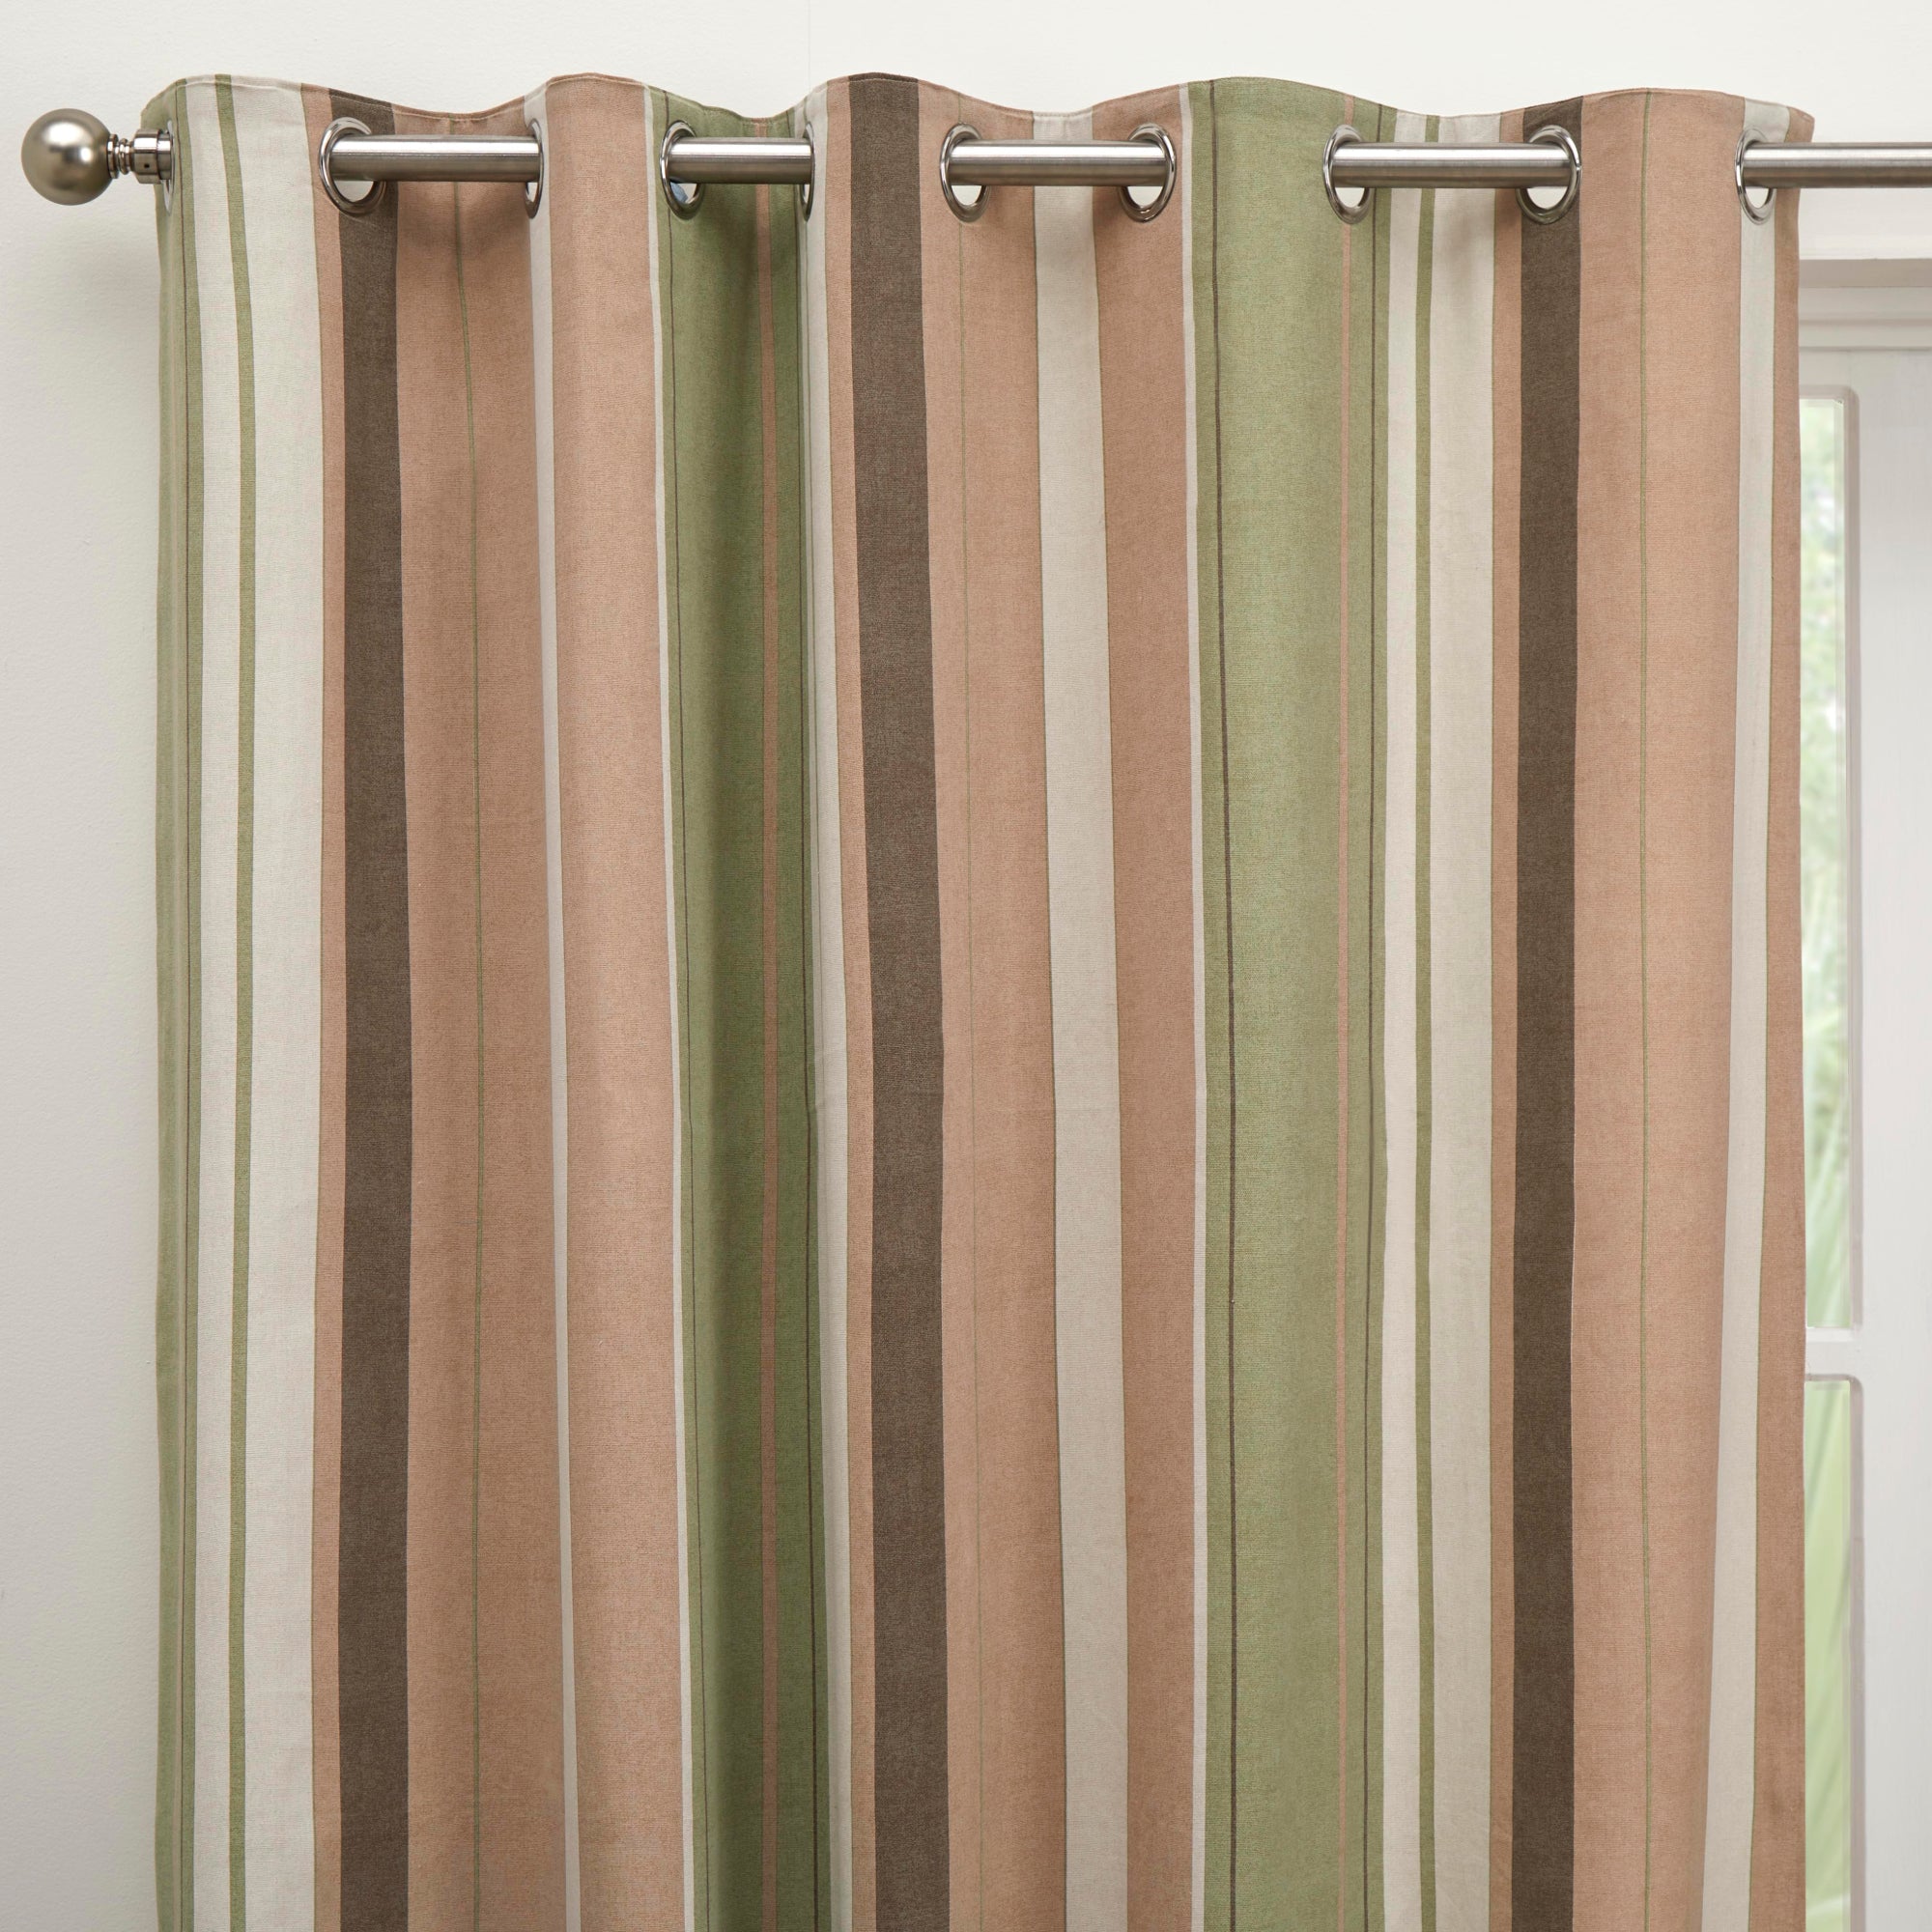 Pair of Eyelet Curtains Whitworth by Fusion in Green